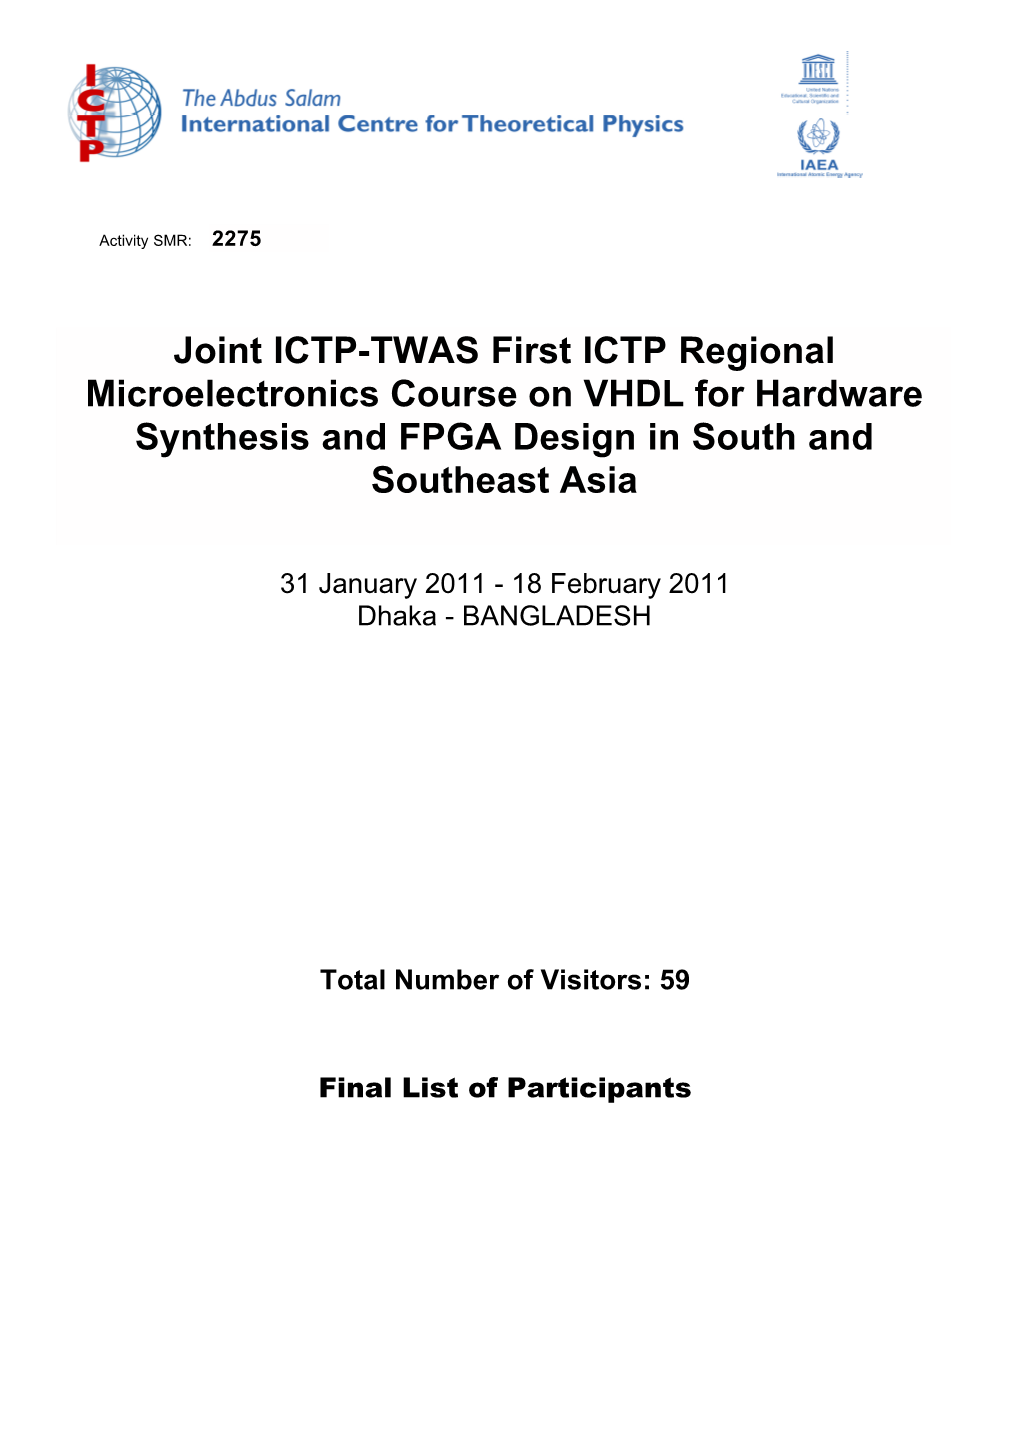 Joint ICTP-TWAS First ICTP Regional Microelectronics Course on VHDL for Hardware Synthesis and FPGA Design in South and Southeast Asia